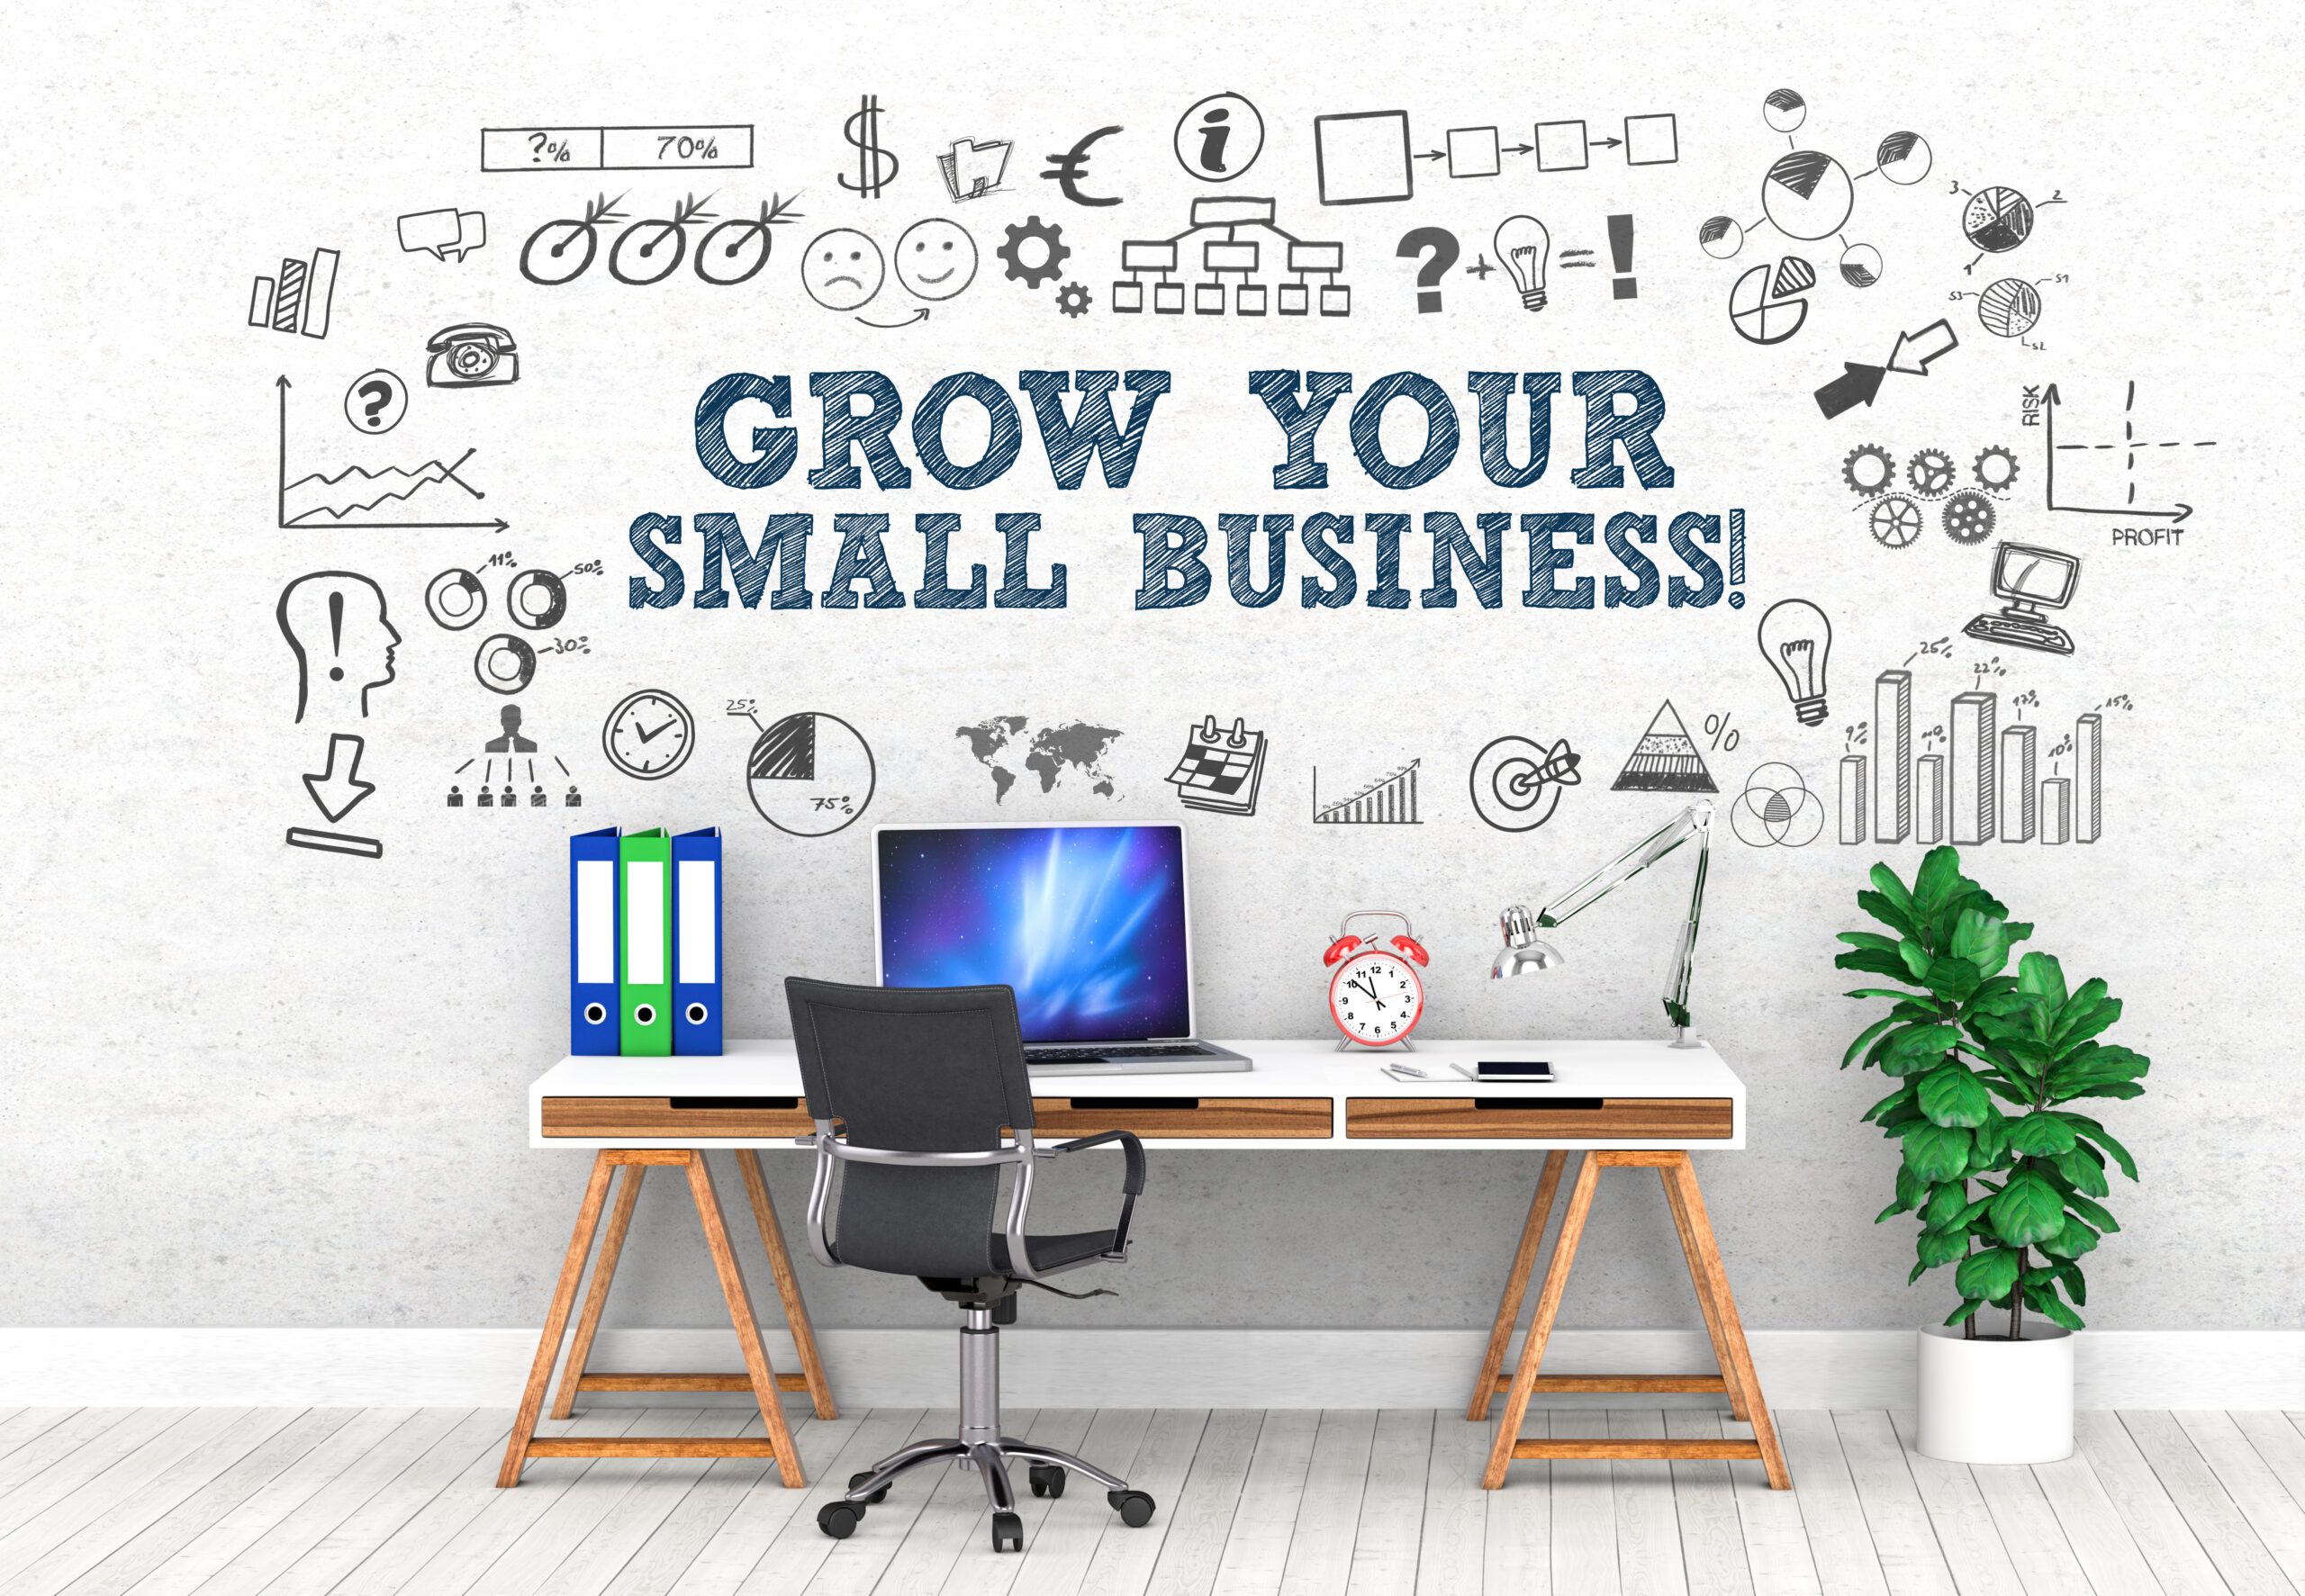 How Can Digital Marketing Strategies Help Me Grow My Small Business